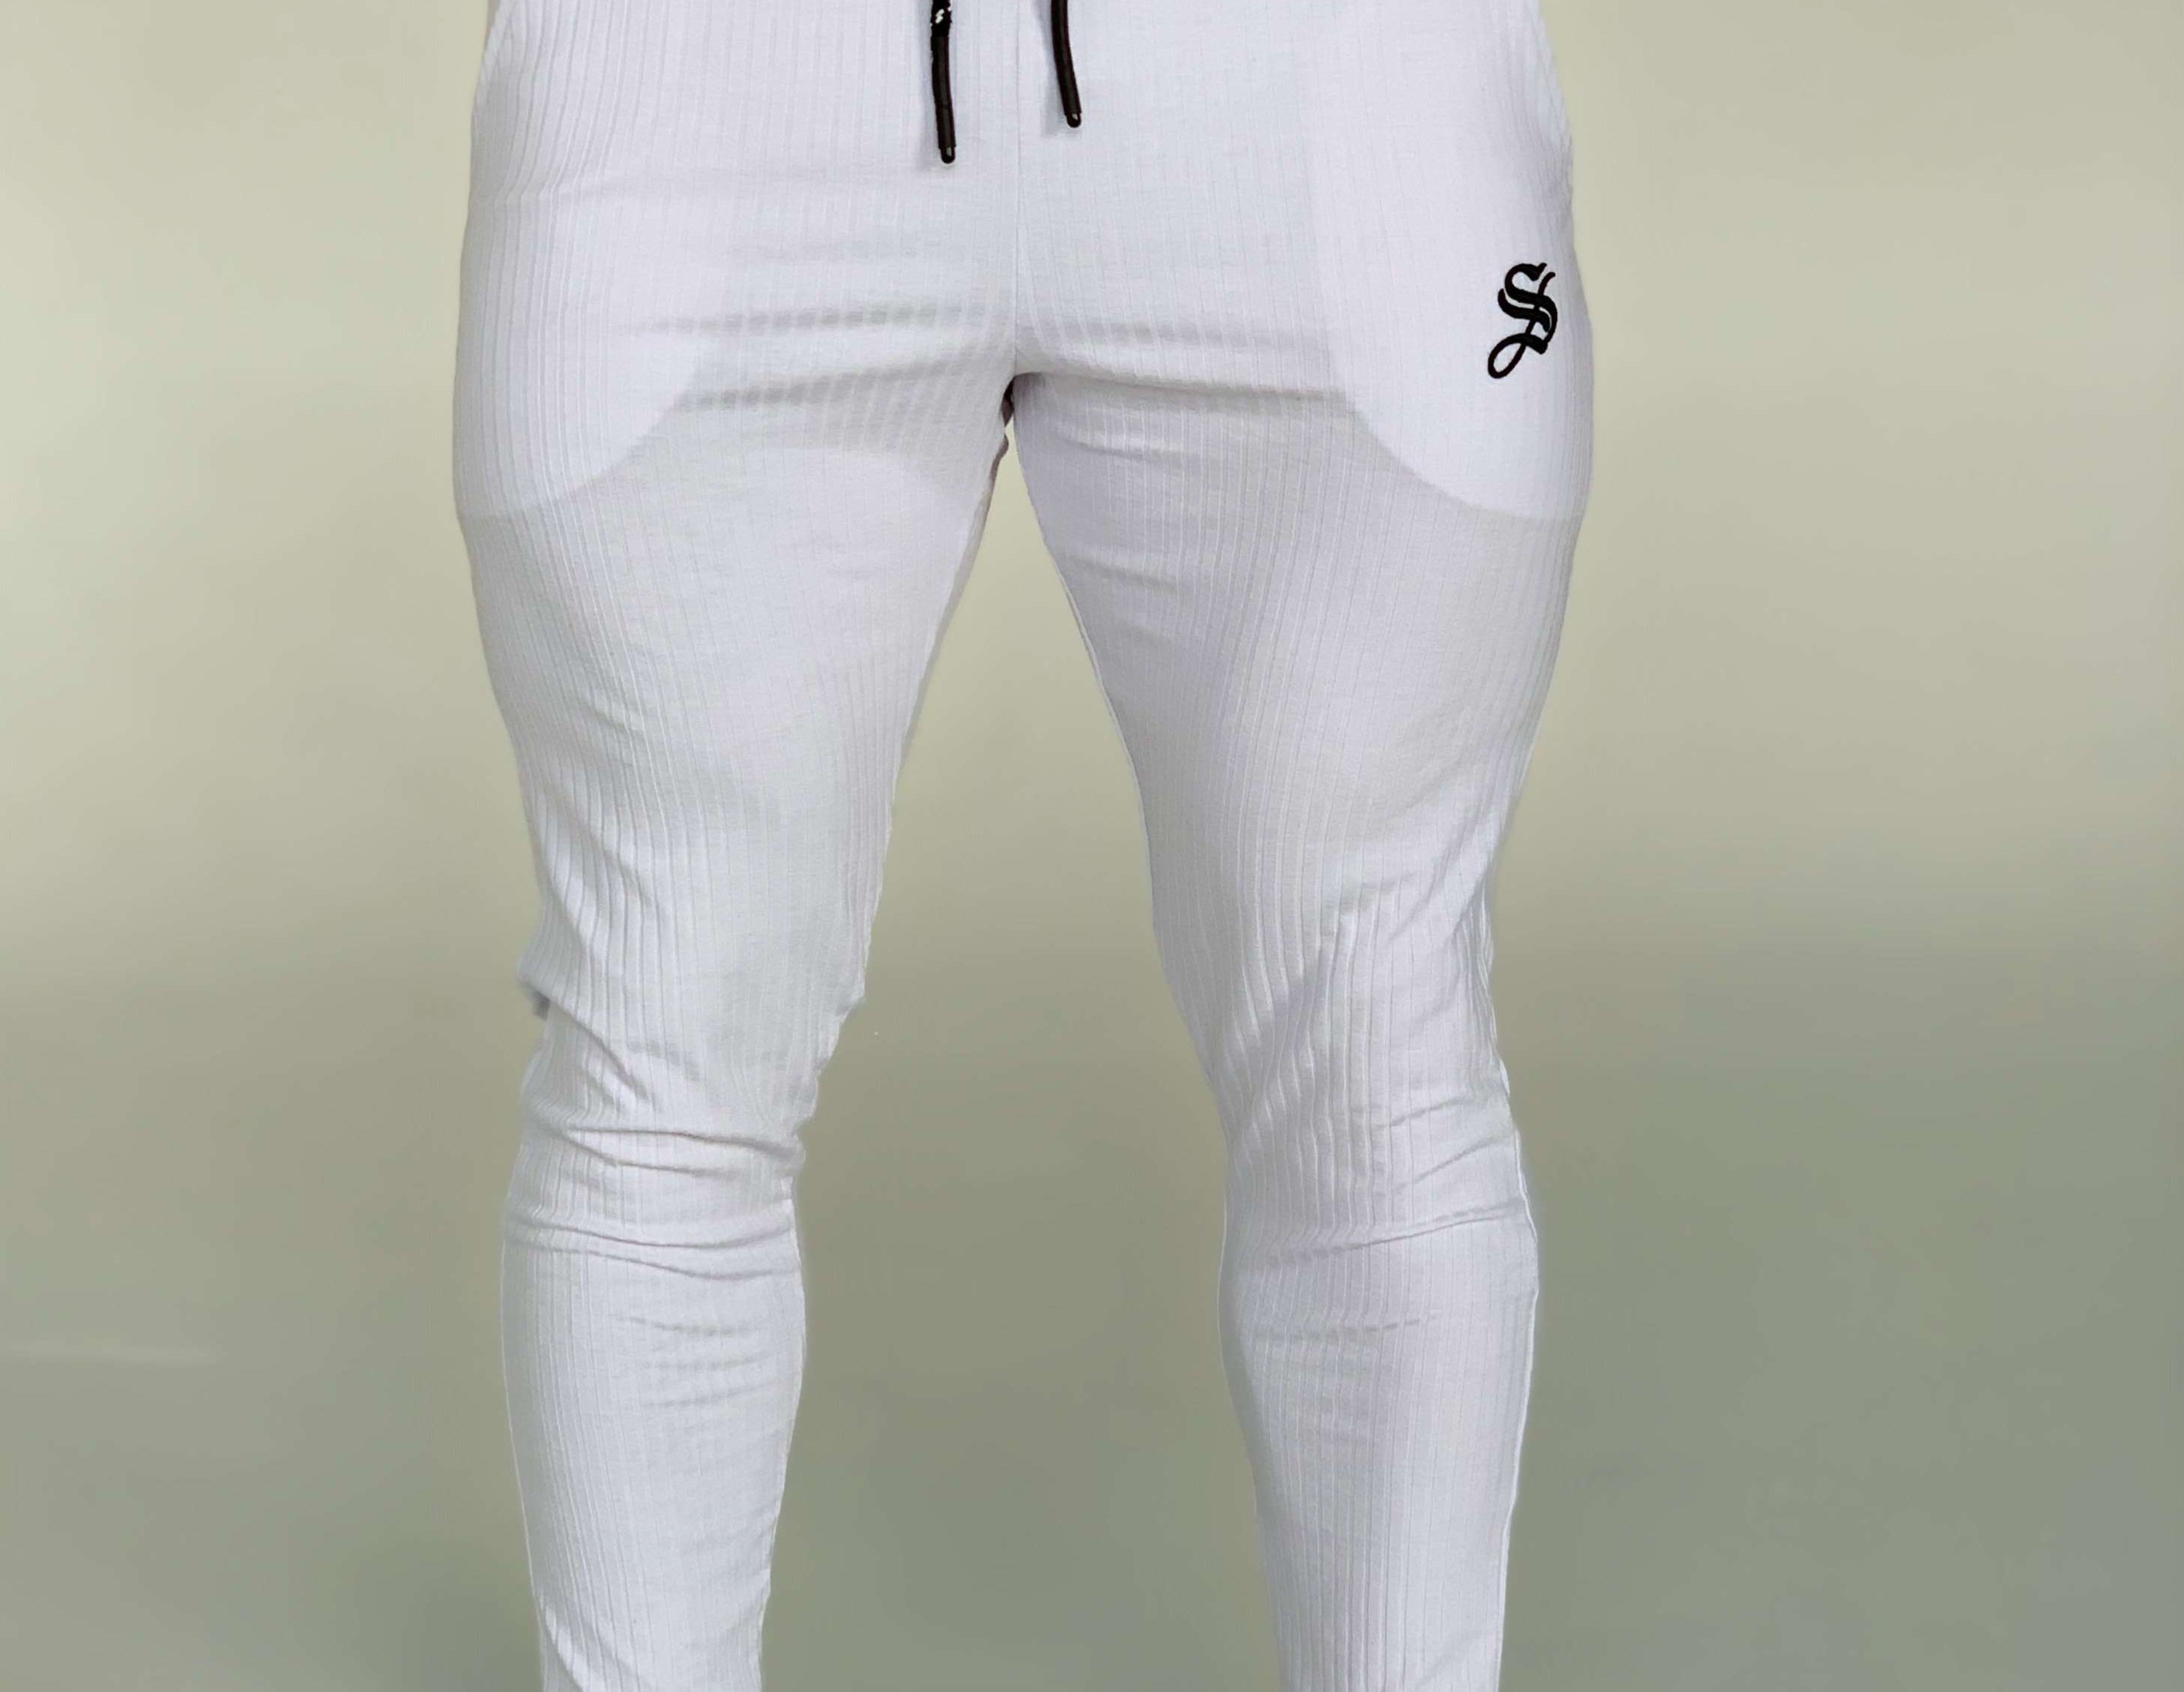 Mendoza - White Joggers for Men (PRE-ORDER DISPATCH DATE 1 JUIN 2021) - Sarman Fashion - Wholesale Clothing Fashion Brand for Men from Canada